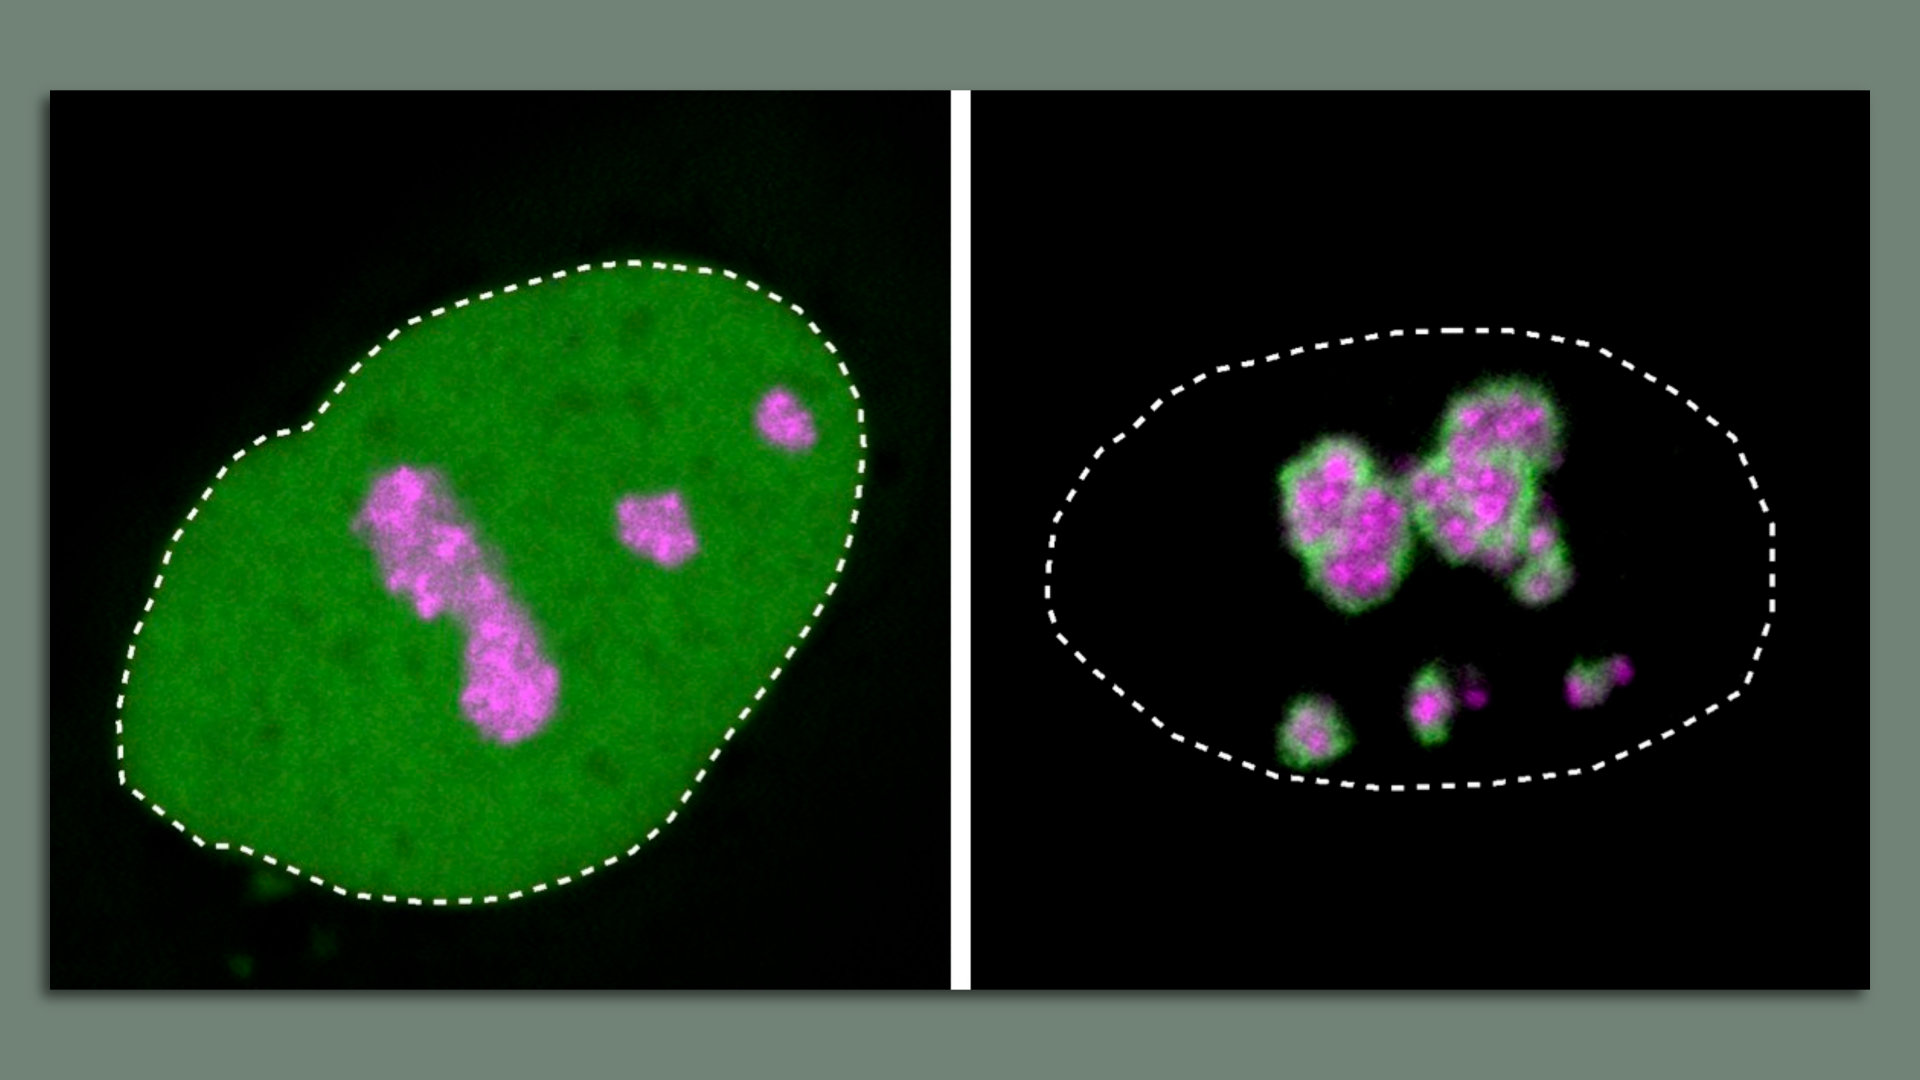 microscope image of proteins in nucleolus and not